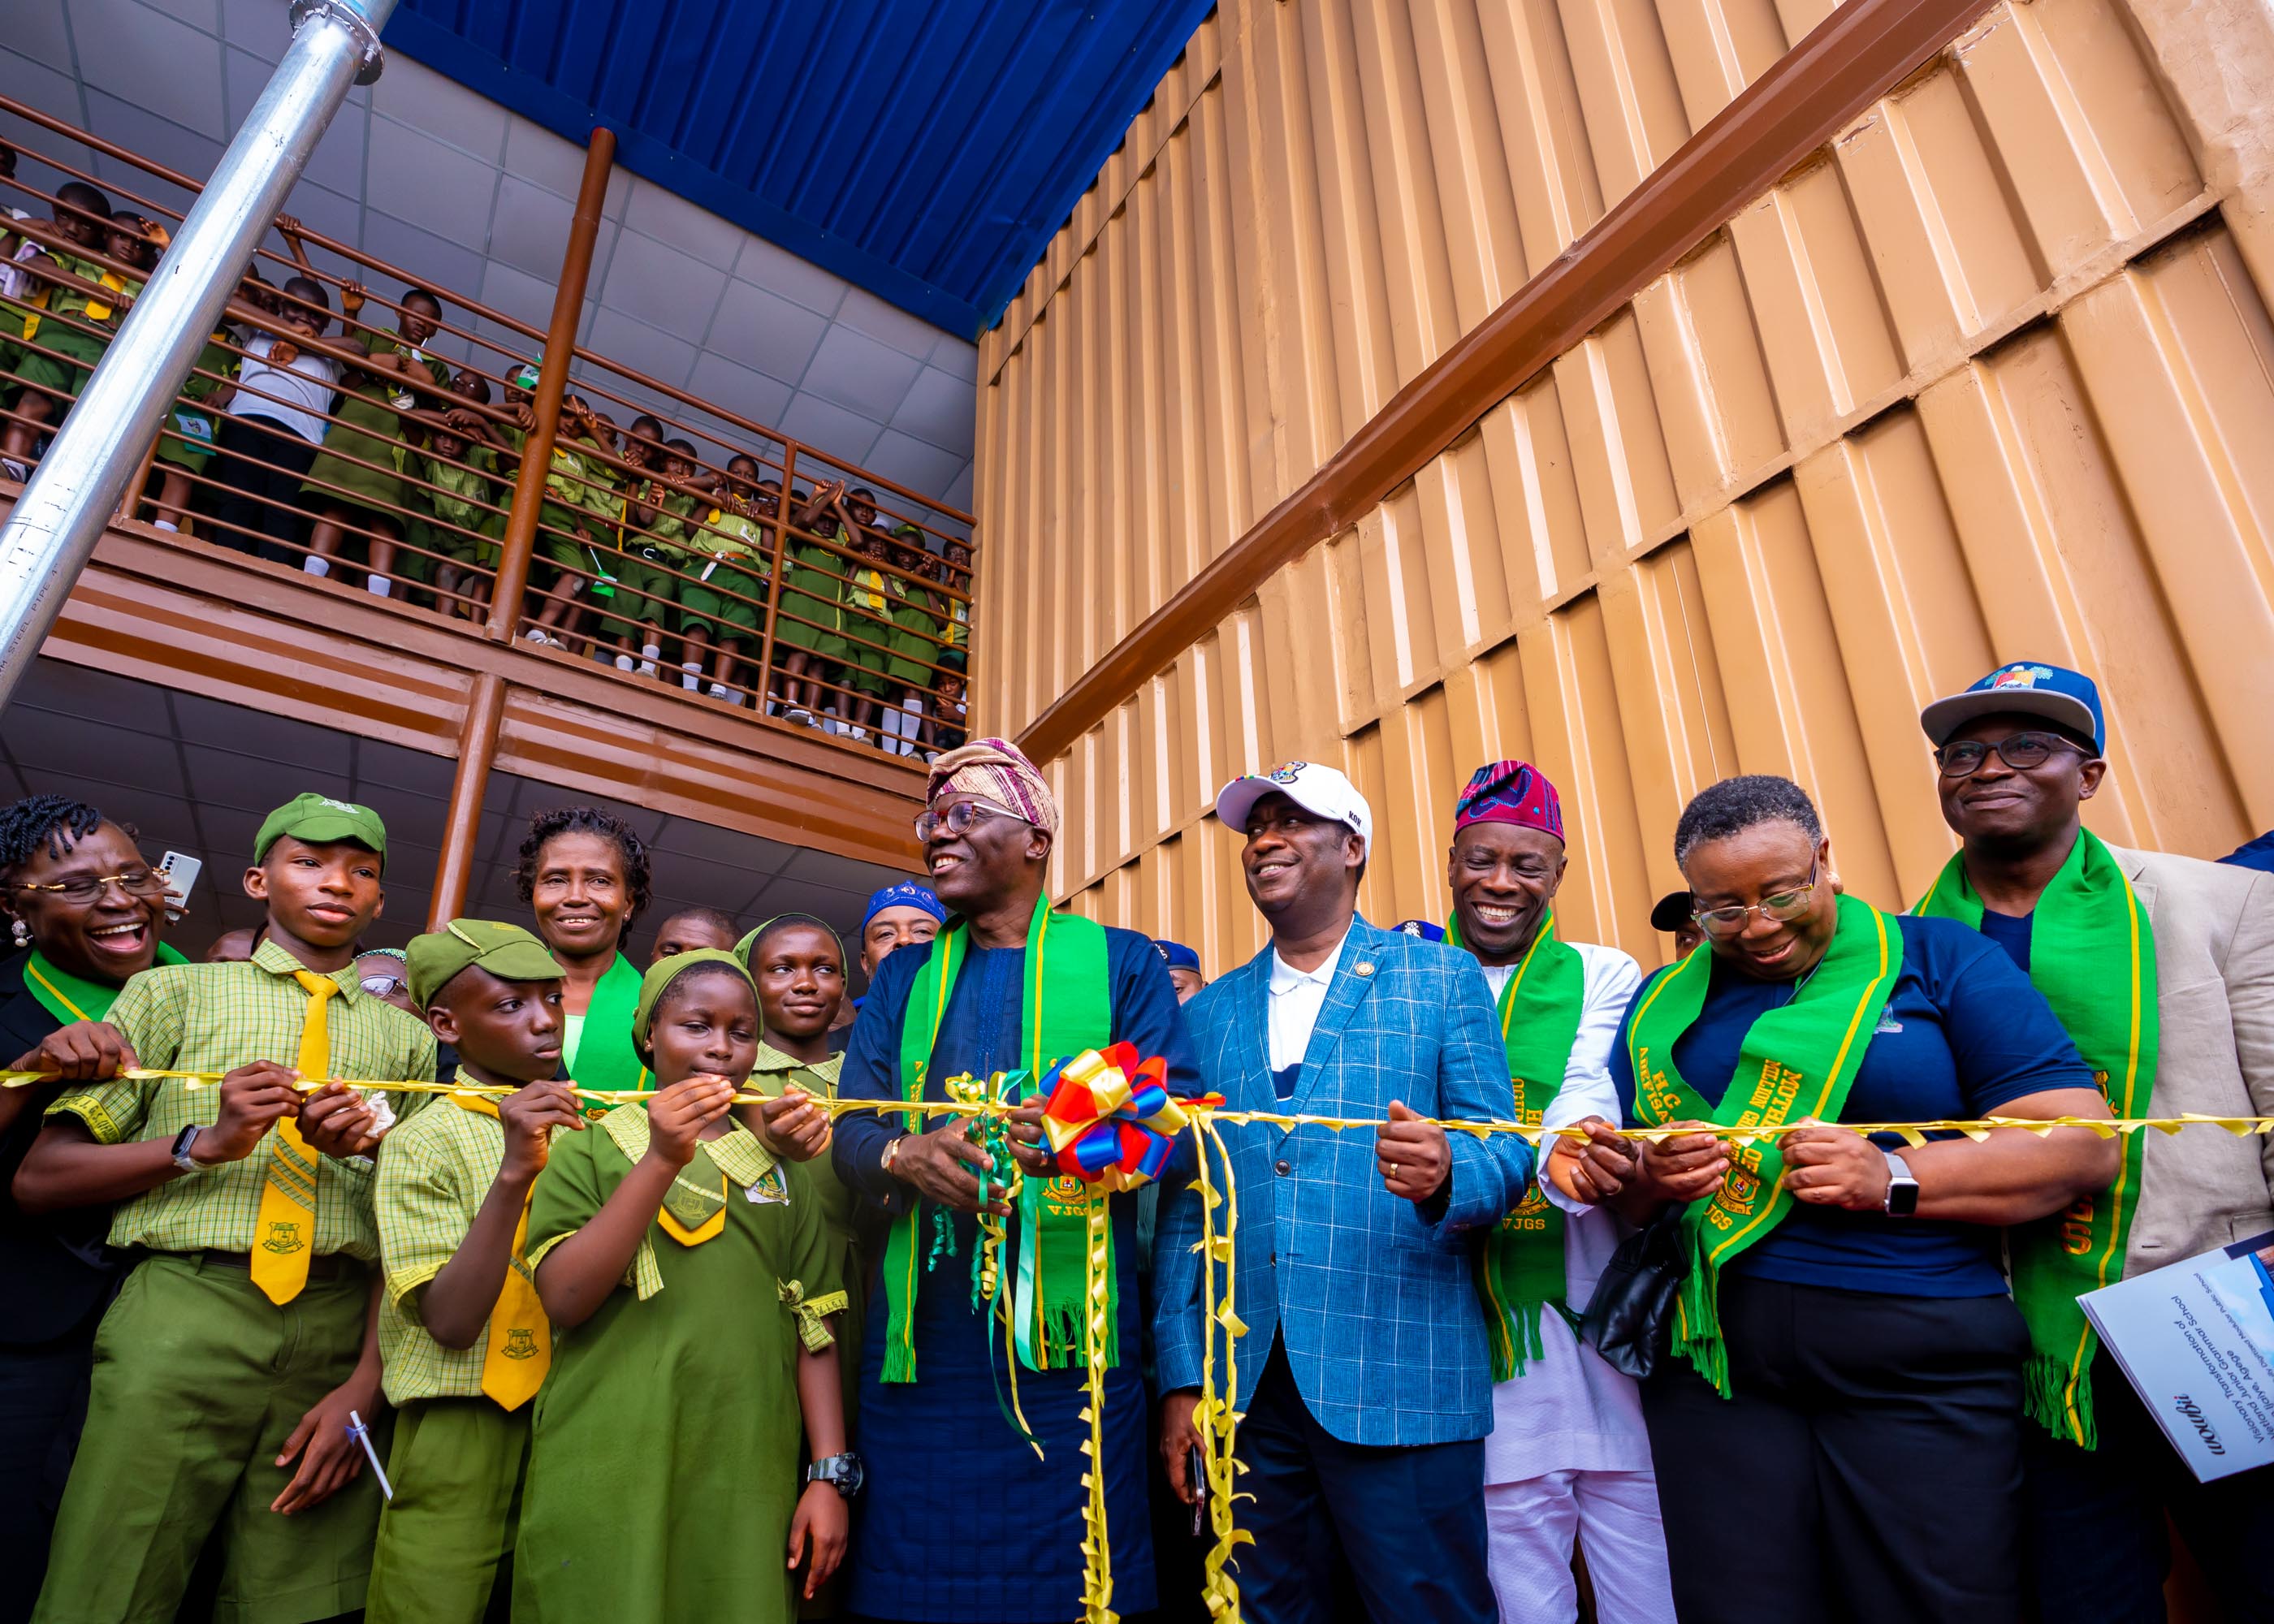 SANWO-OLU UNVEILS DIGITISED CONTAINER CLASSROOMS, AS 13 ‘OUTSTANDING’ LAGOS TEACHERS GET BRAND-NEW SUVs